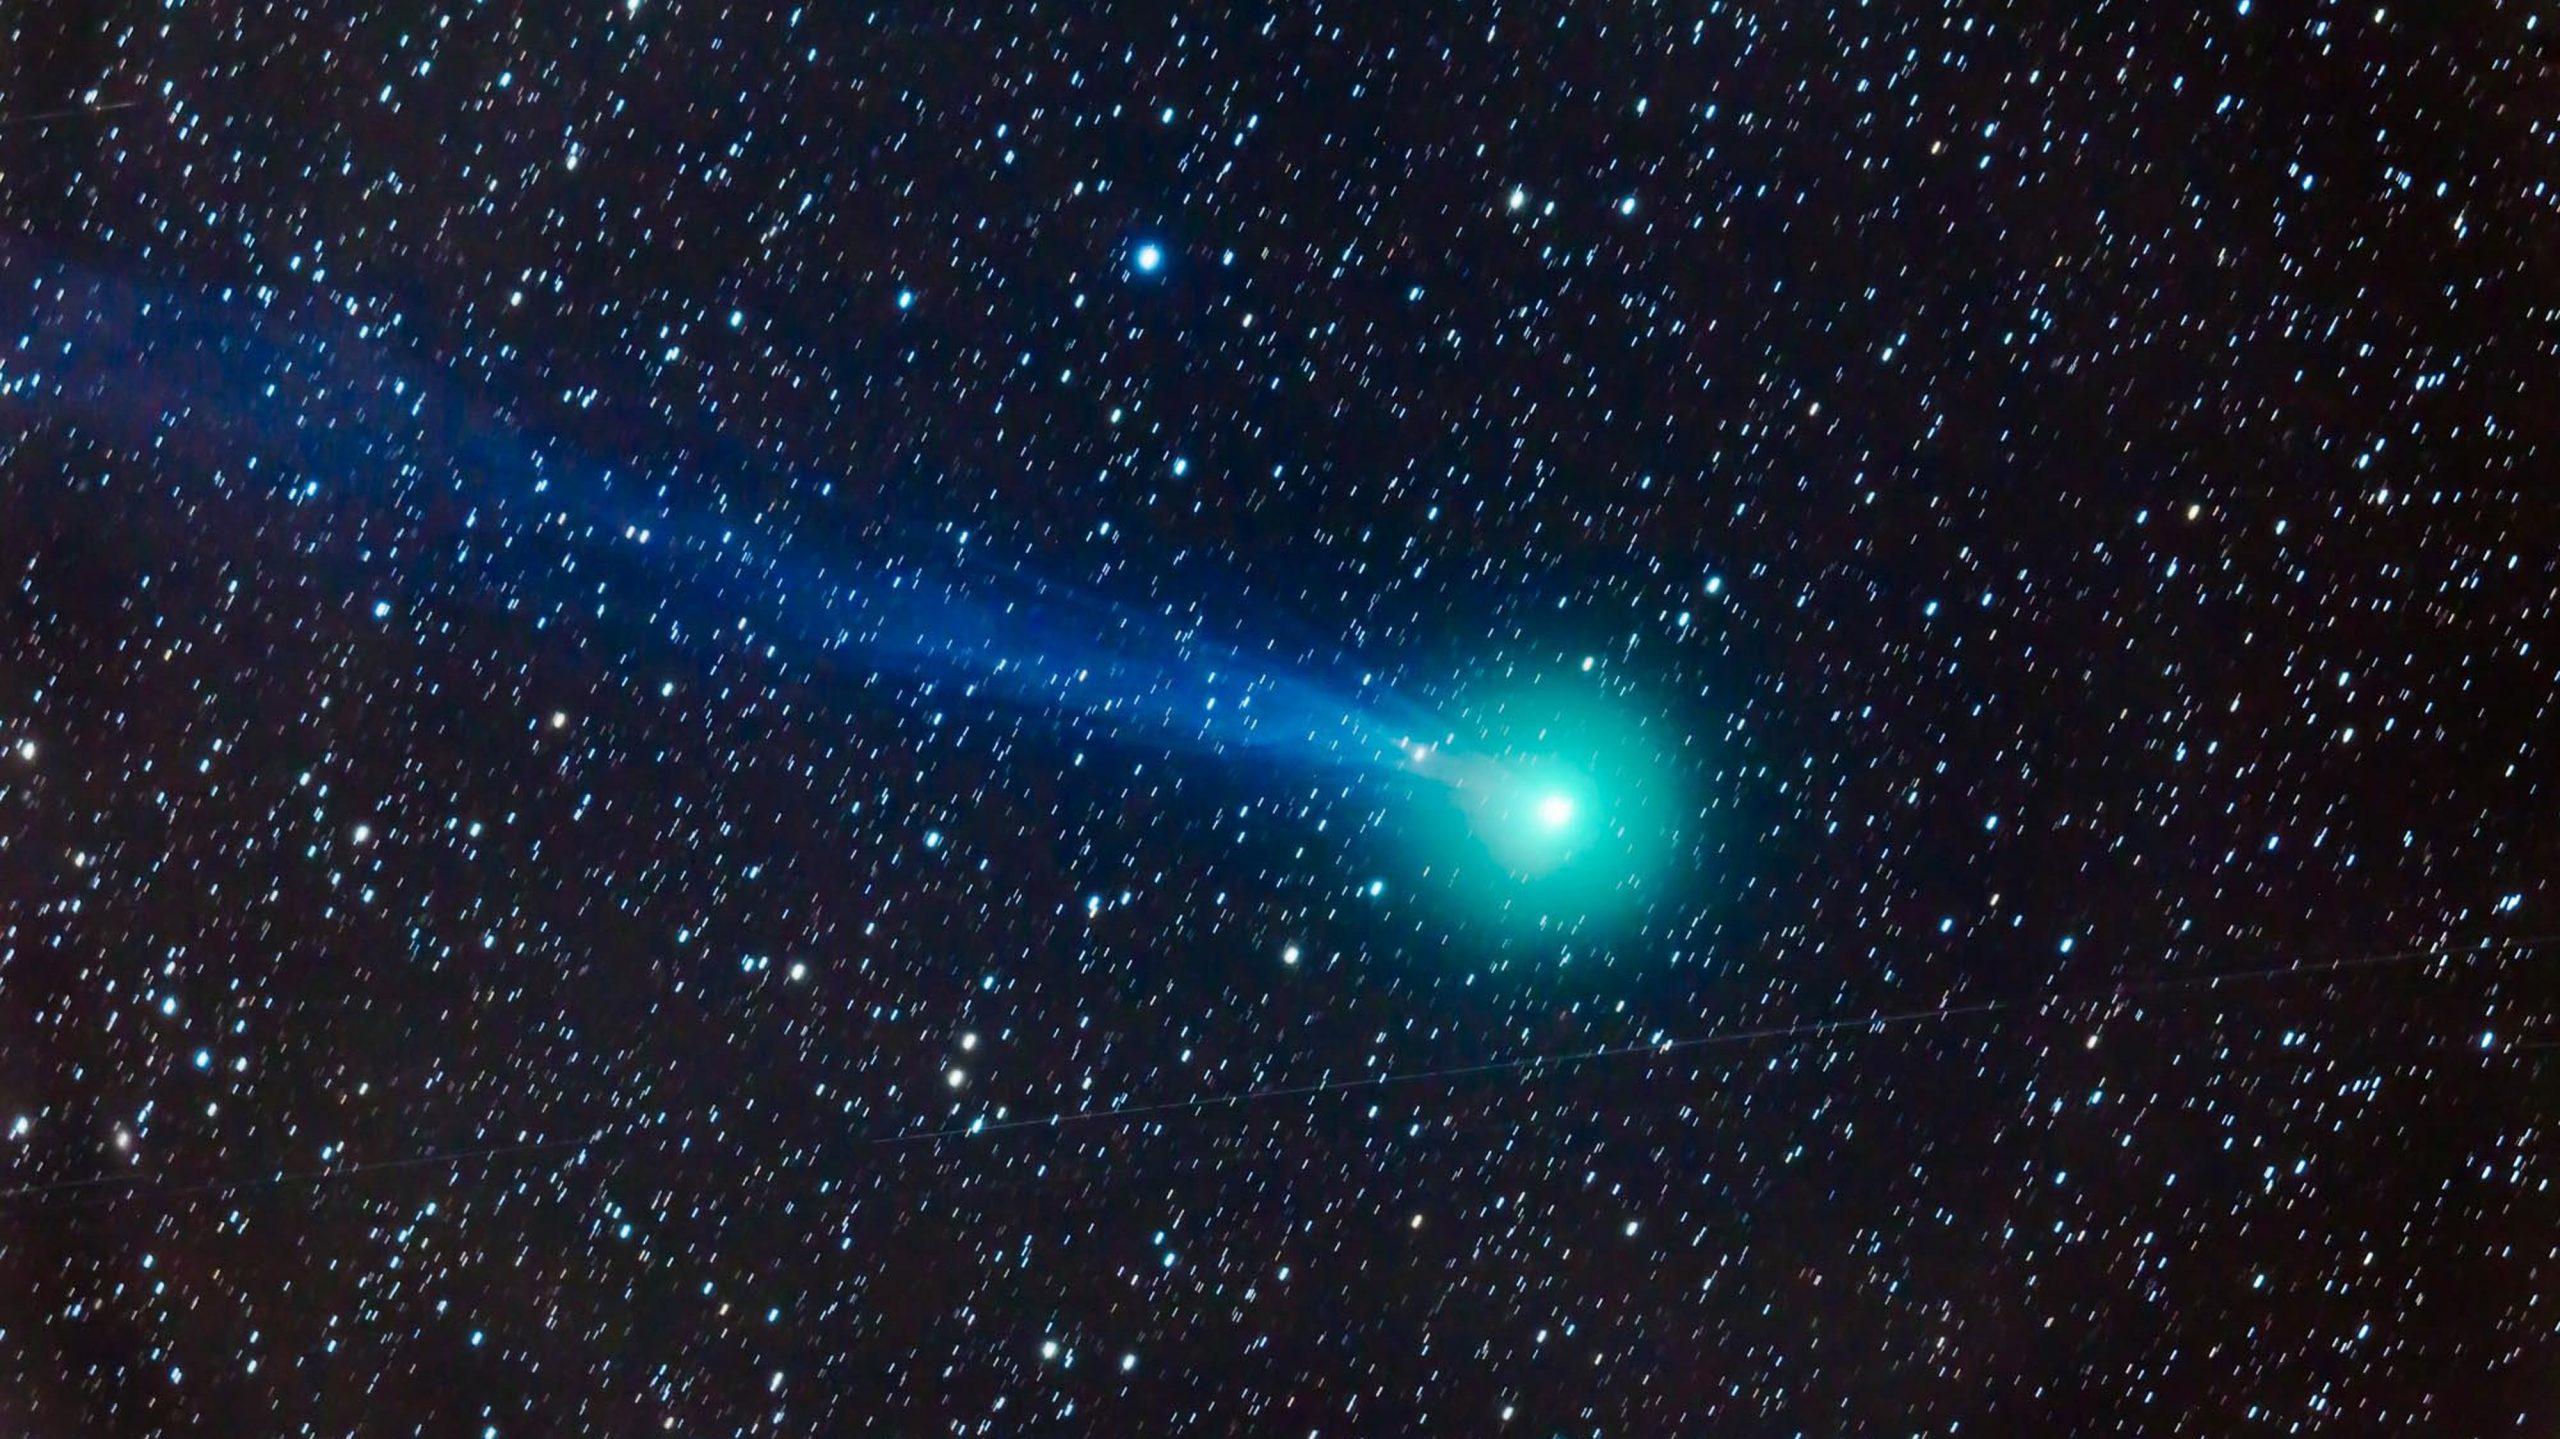 Green comet approaching Earth for a flyby_40.1